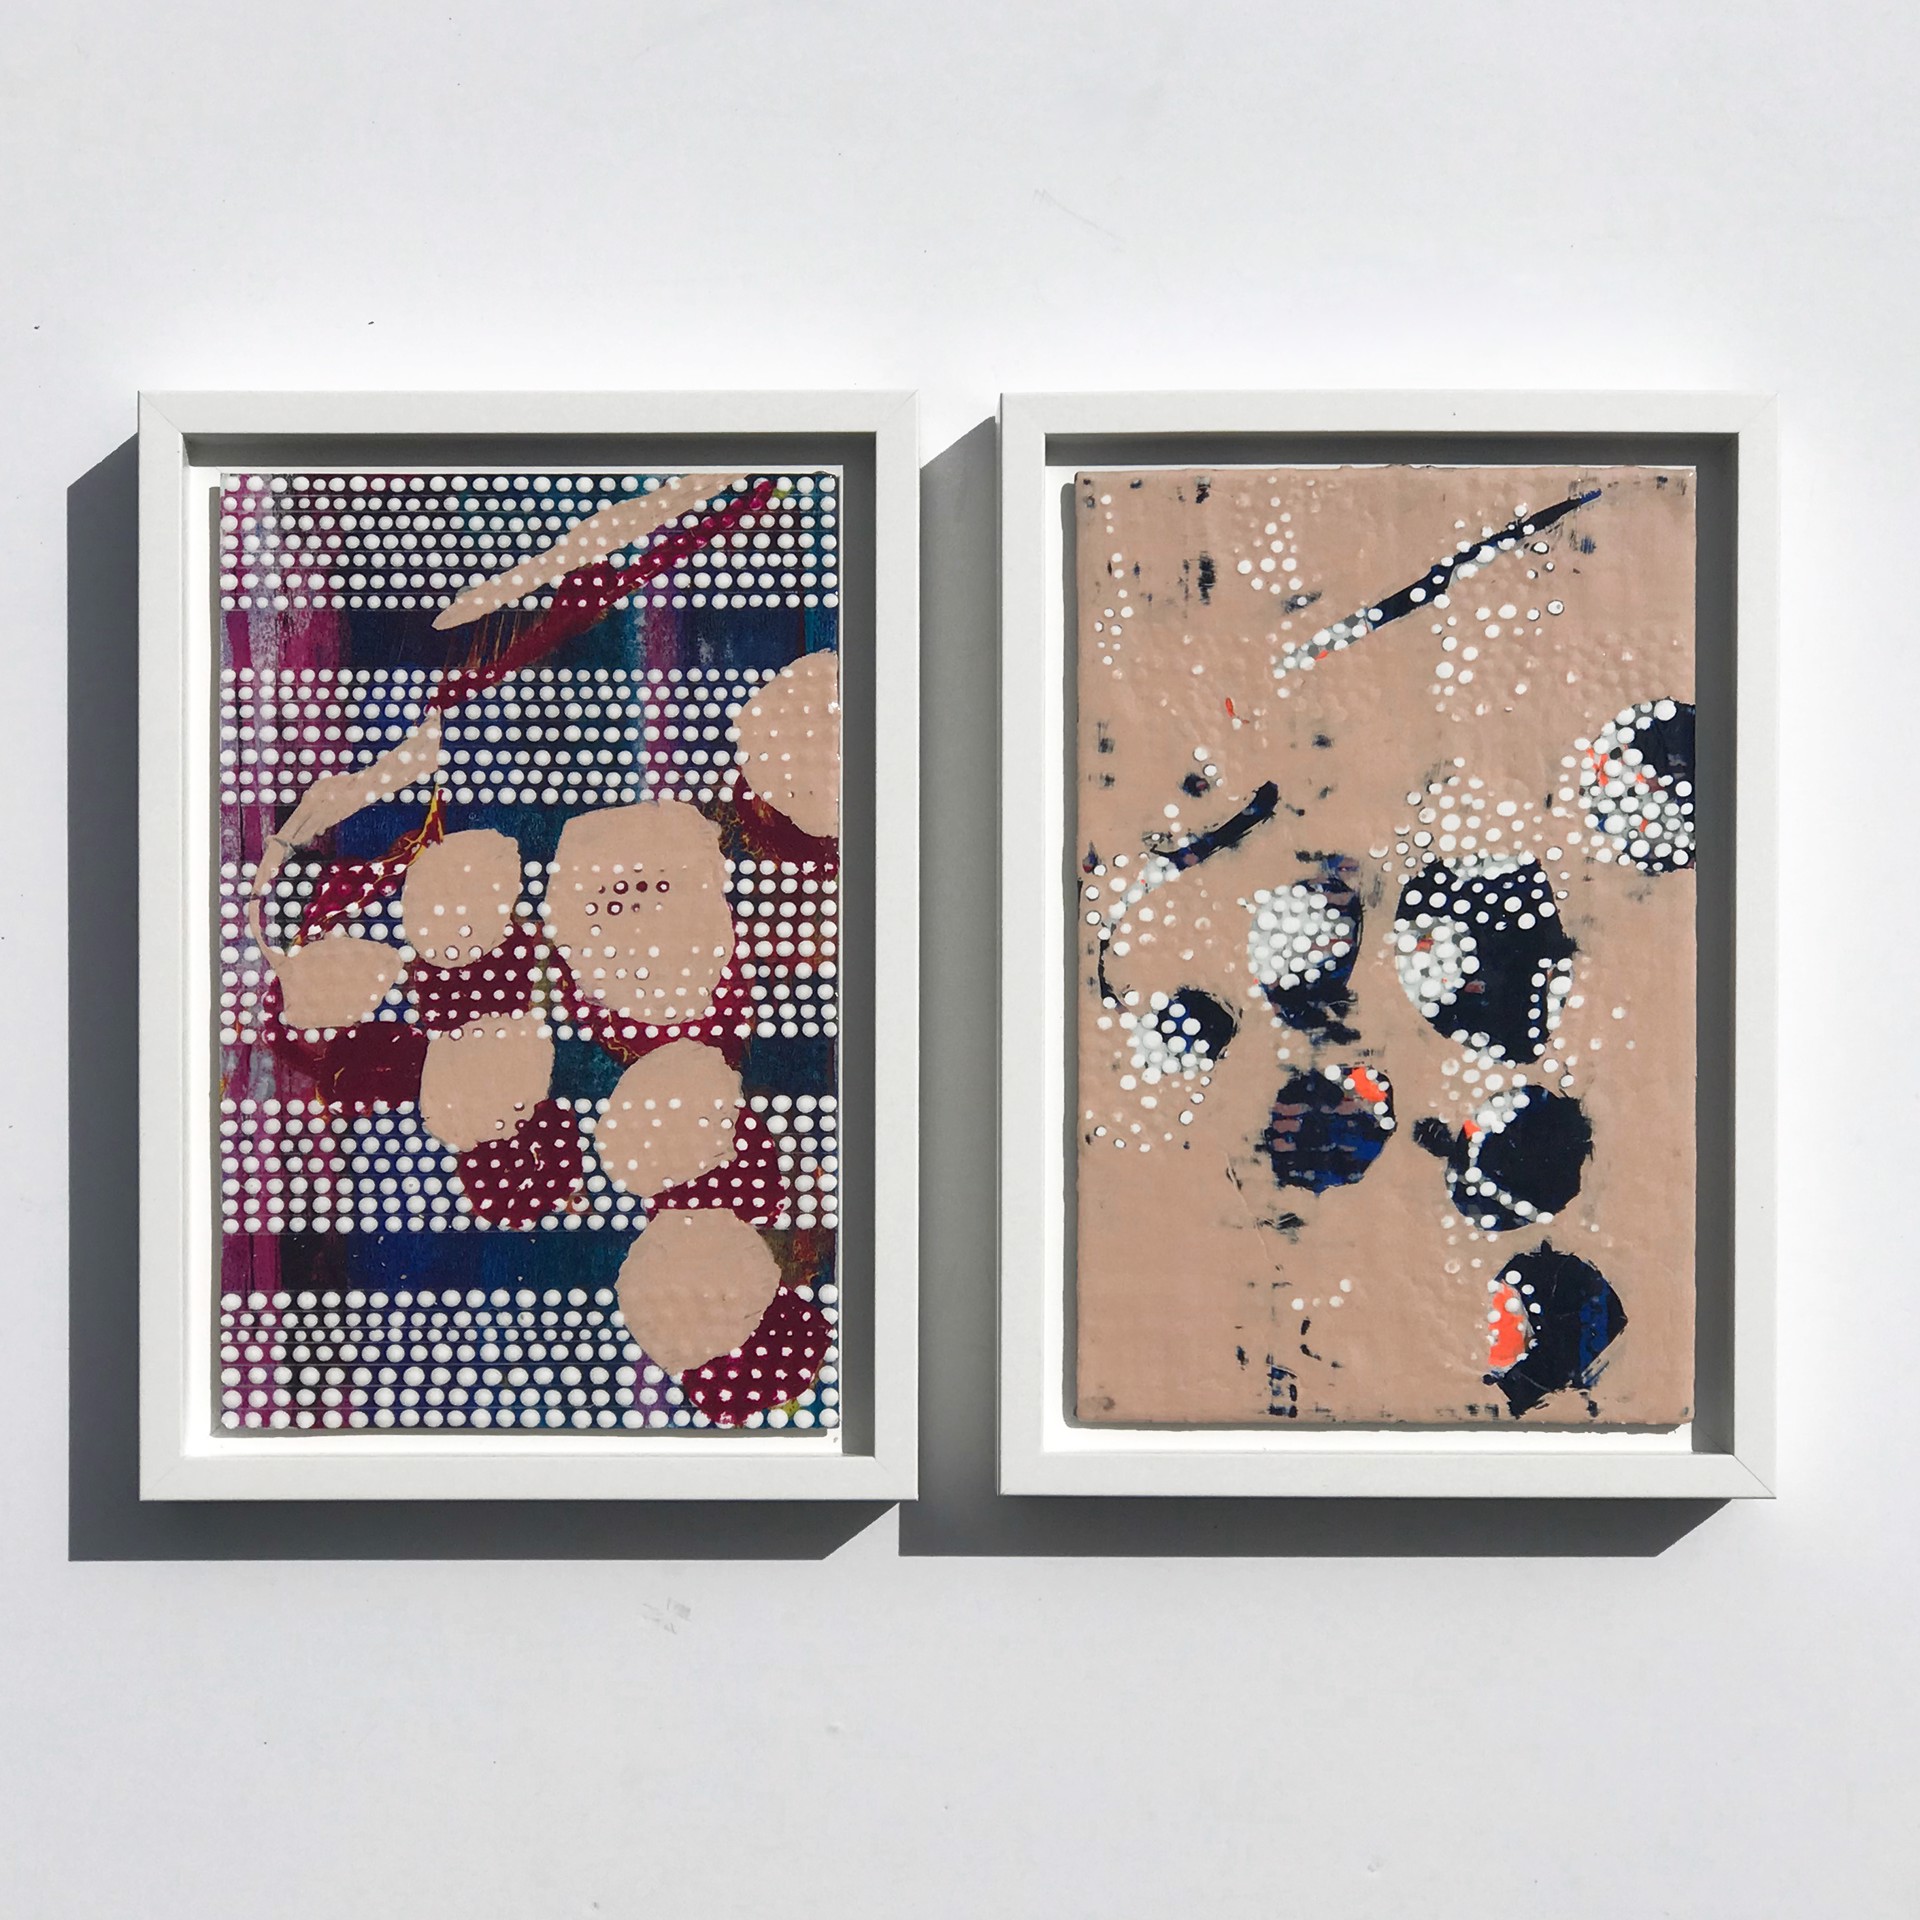 Abstract Patterned Pair Of Small Works One The Negative Of The Other Formed Primarily By Dots 